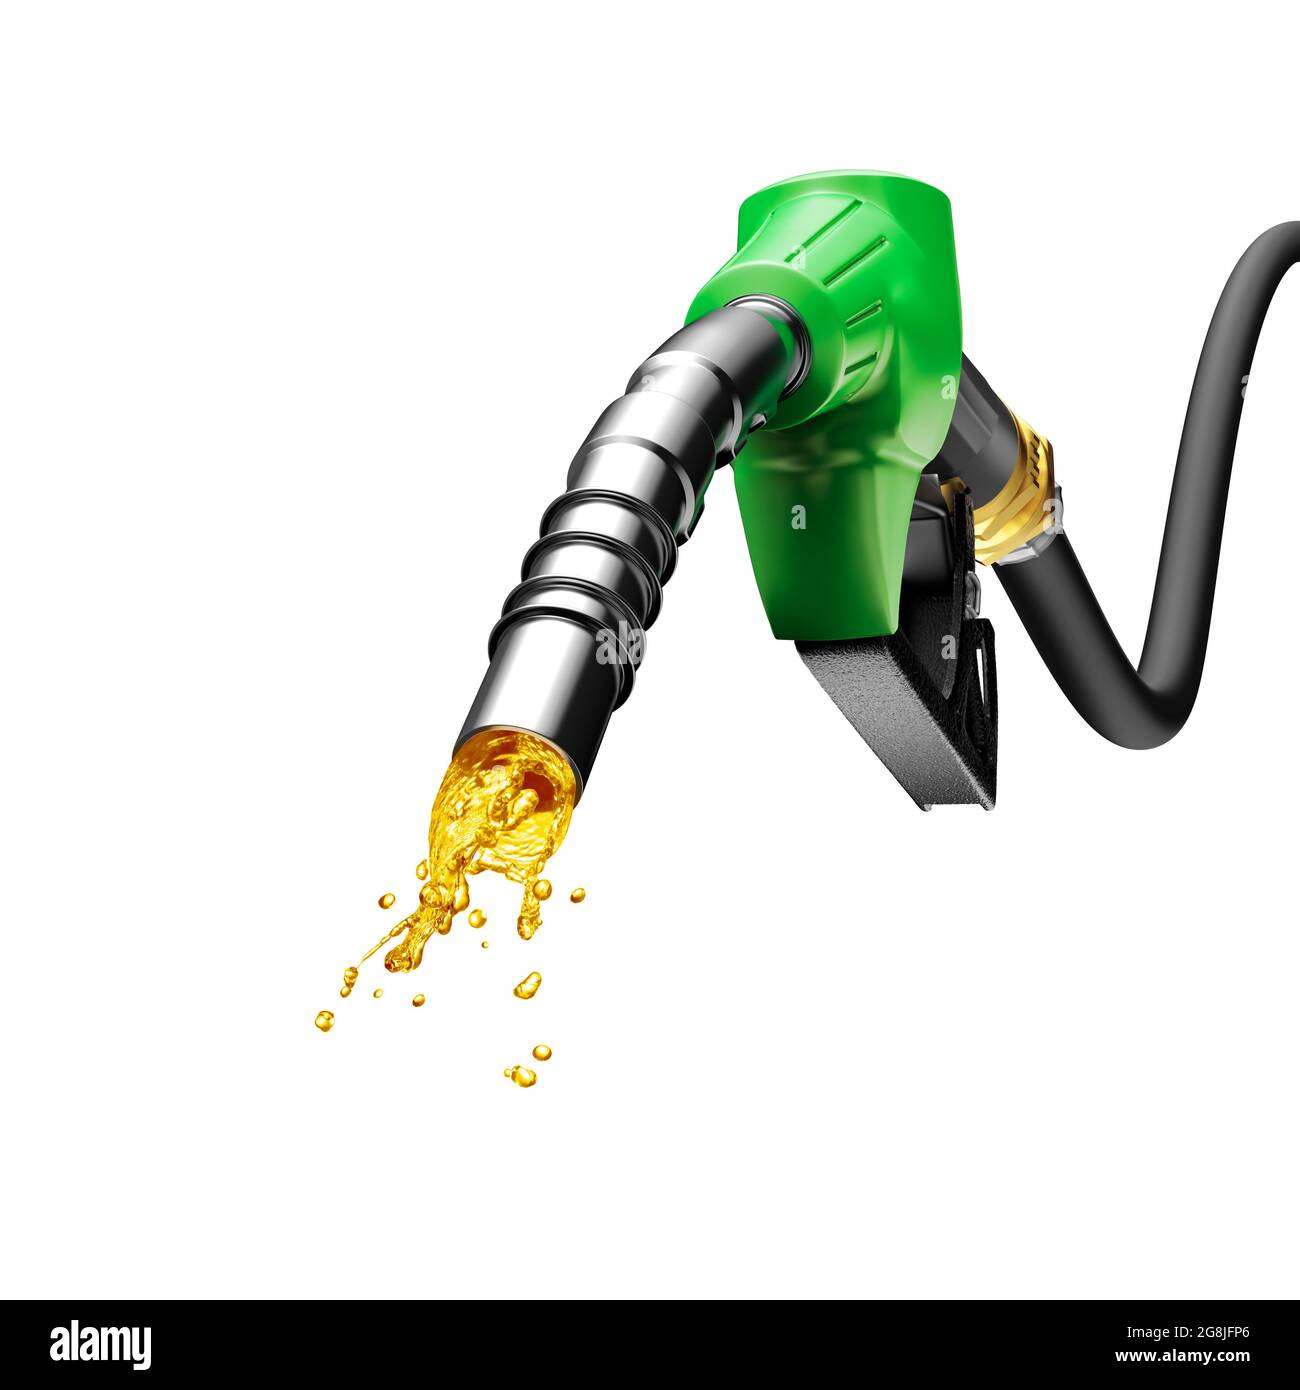 Green gas pump nozzle with petrol splash isolated on white background Stock Photo